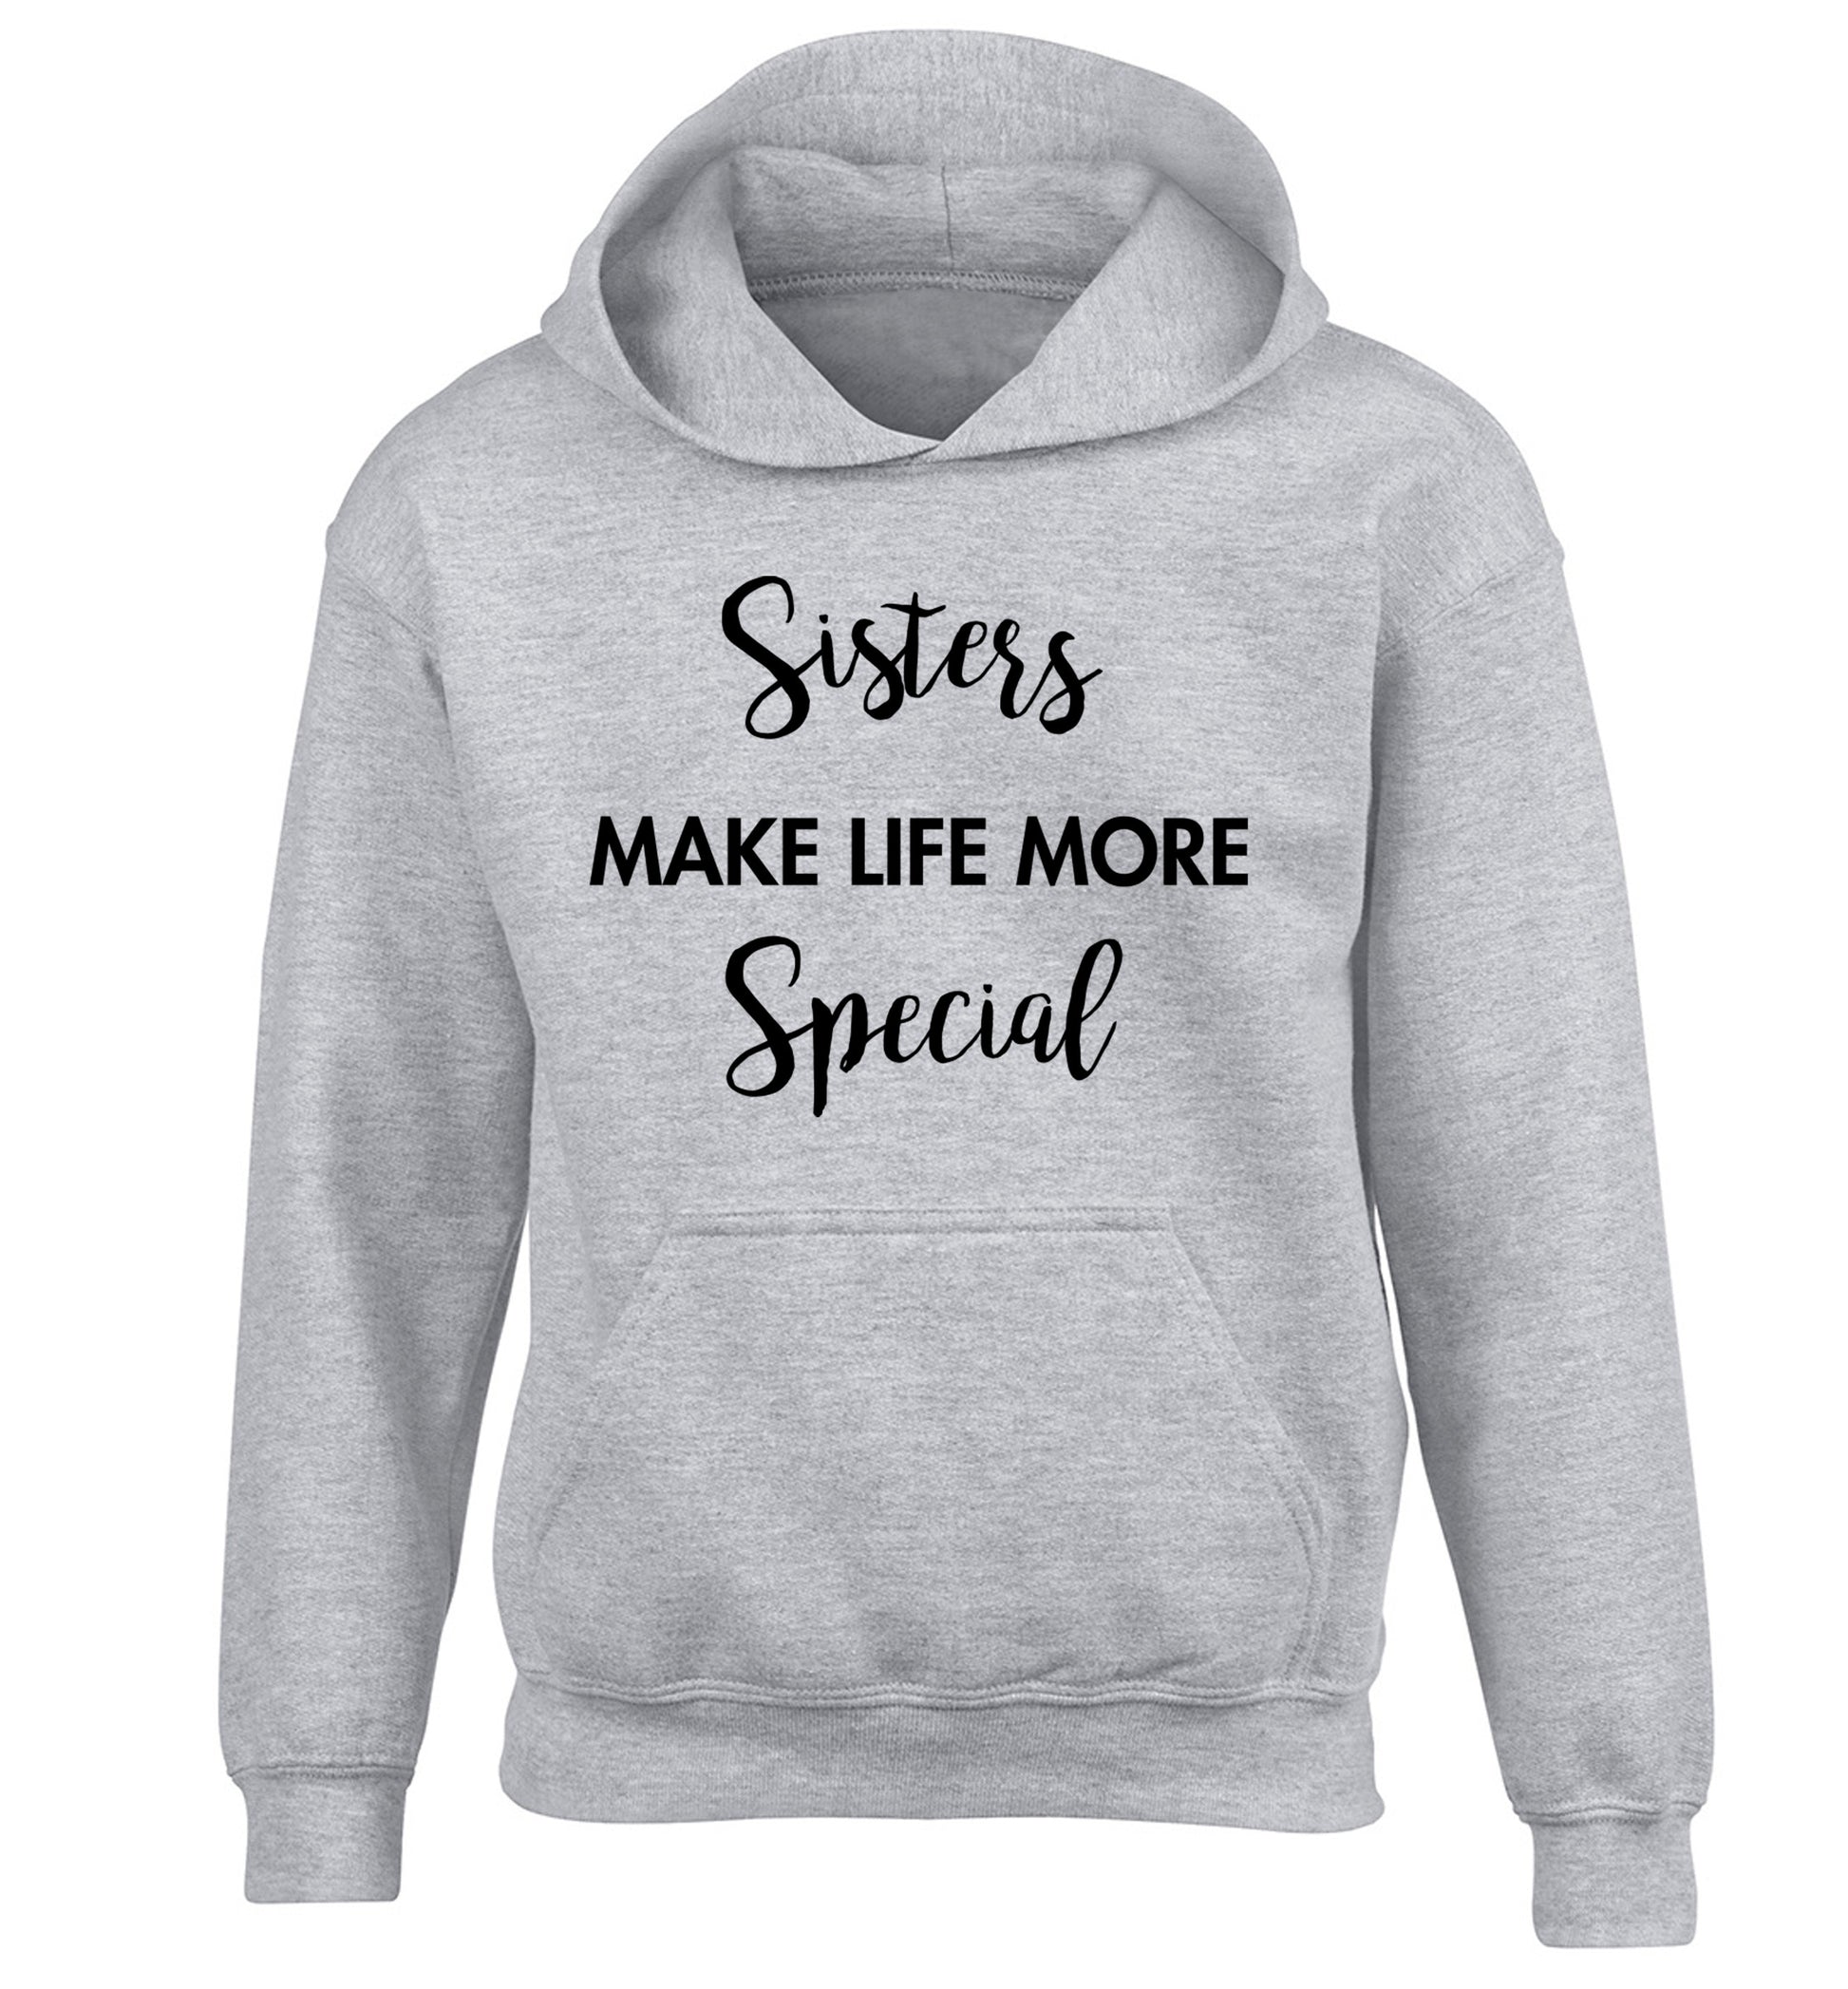 Sisters make life more special children's grey hoodie 12-14 Years